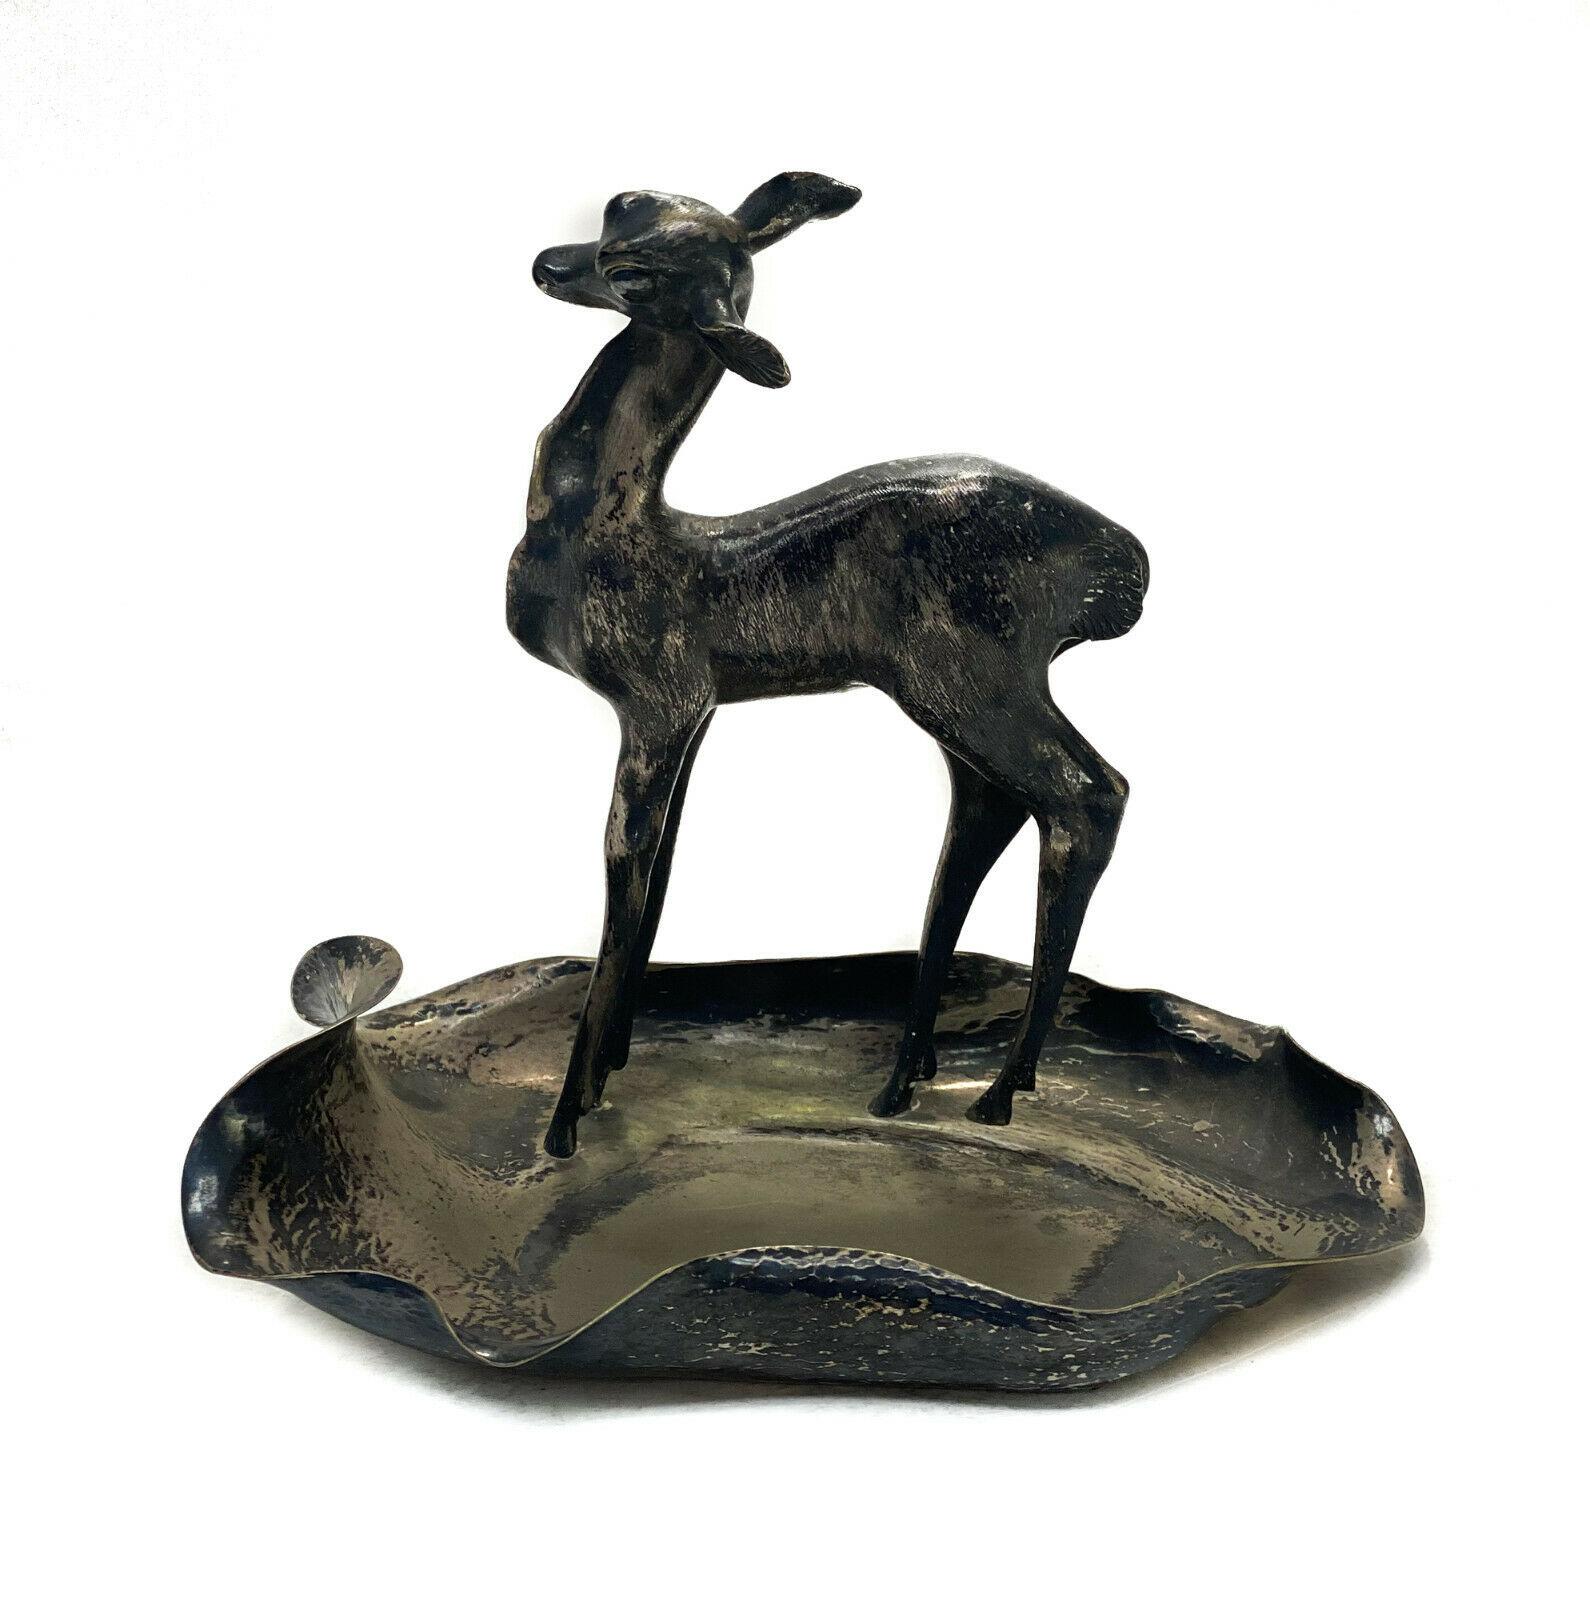 Argenteria Dabbene Italian 800 silver deer desk pen tray or change holder MI 277

A curved rim that is slightly hand hammered. 277 MI mark to the underside for Argenteria Dabbene.

Additional information:
Material: Silver 
Type: